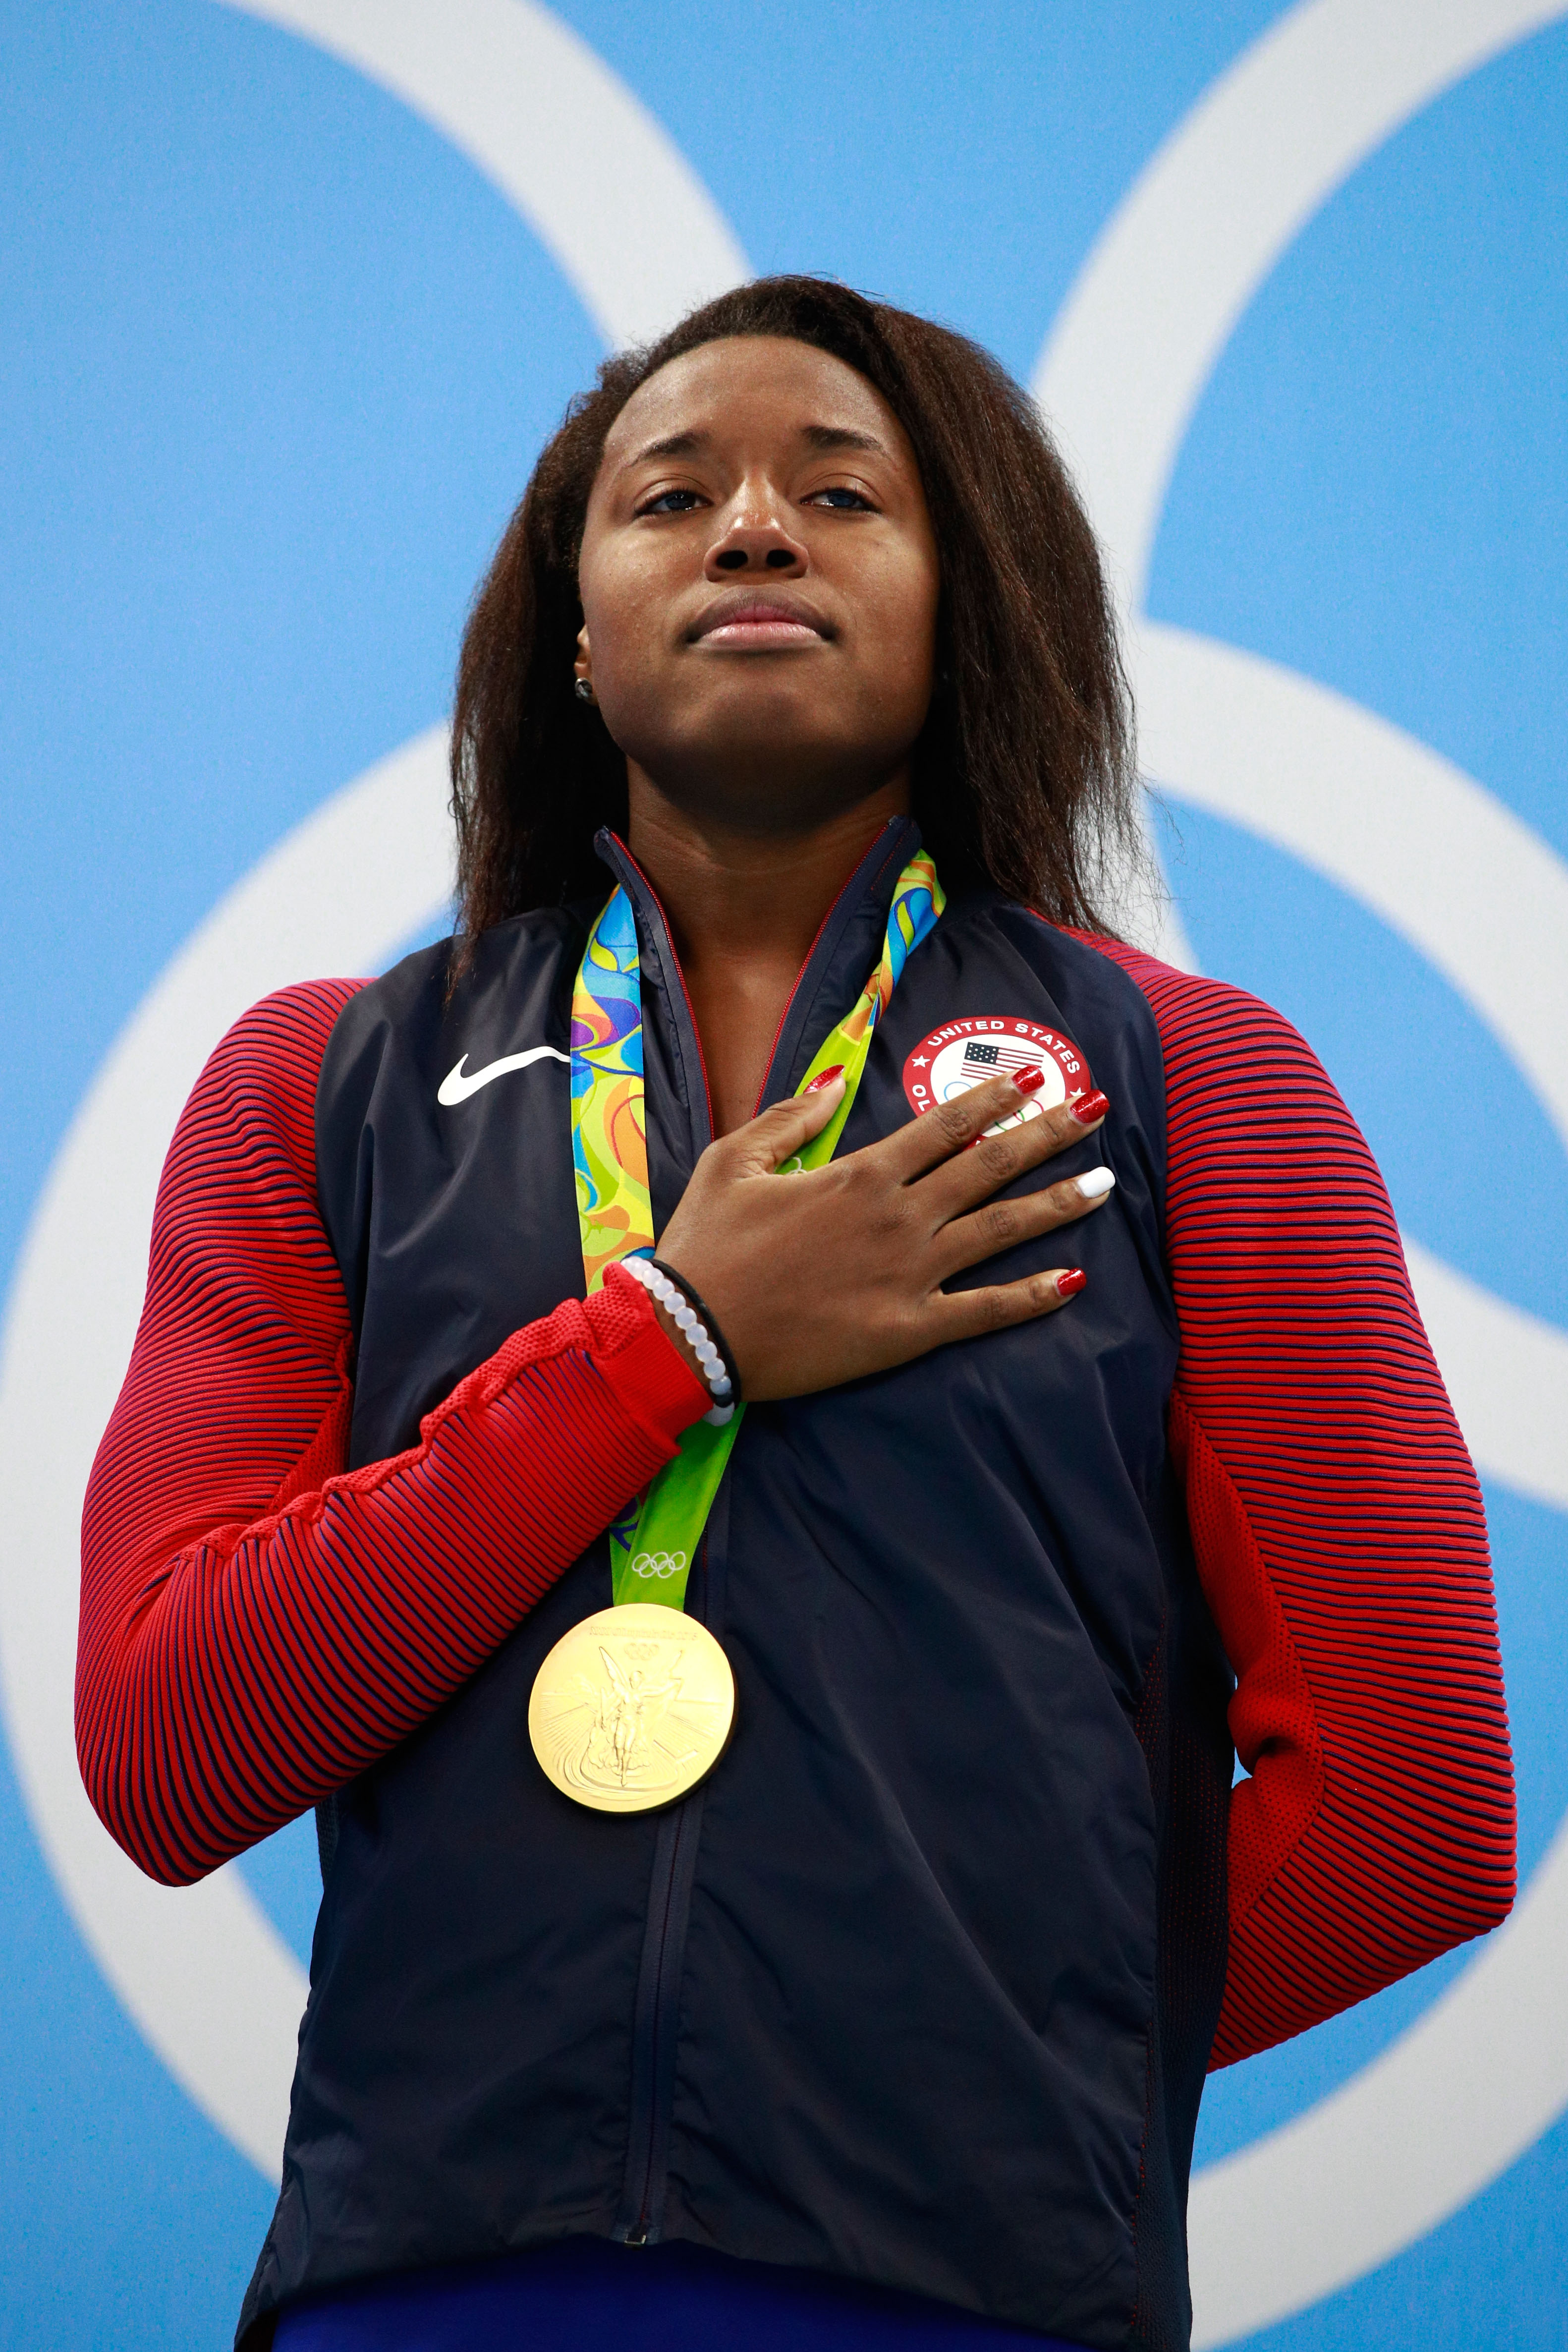 Gold medalist Simone Manuel.  (Photo by Adam Pretty/Getty Images)